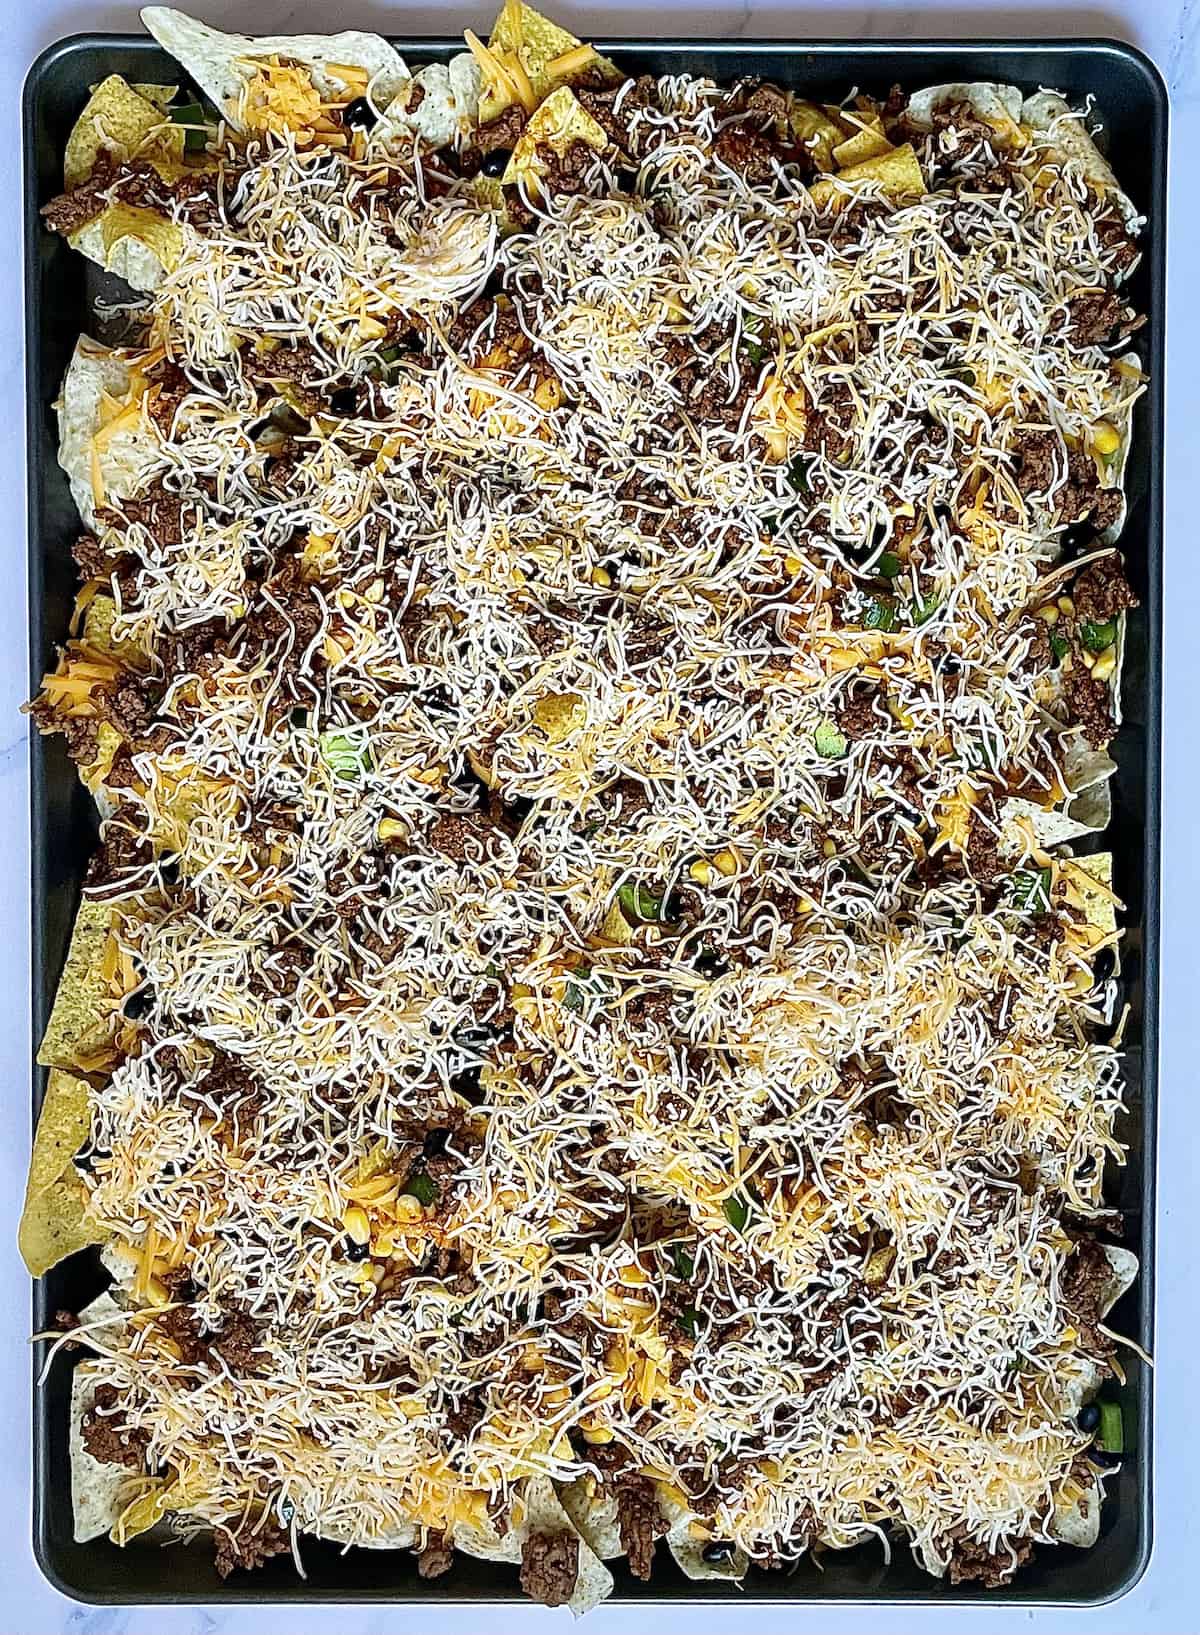 tortilla chips topped with cheese, beans, and peppers on a sheet pan